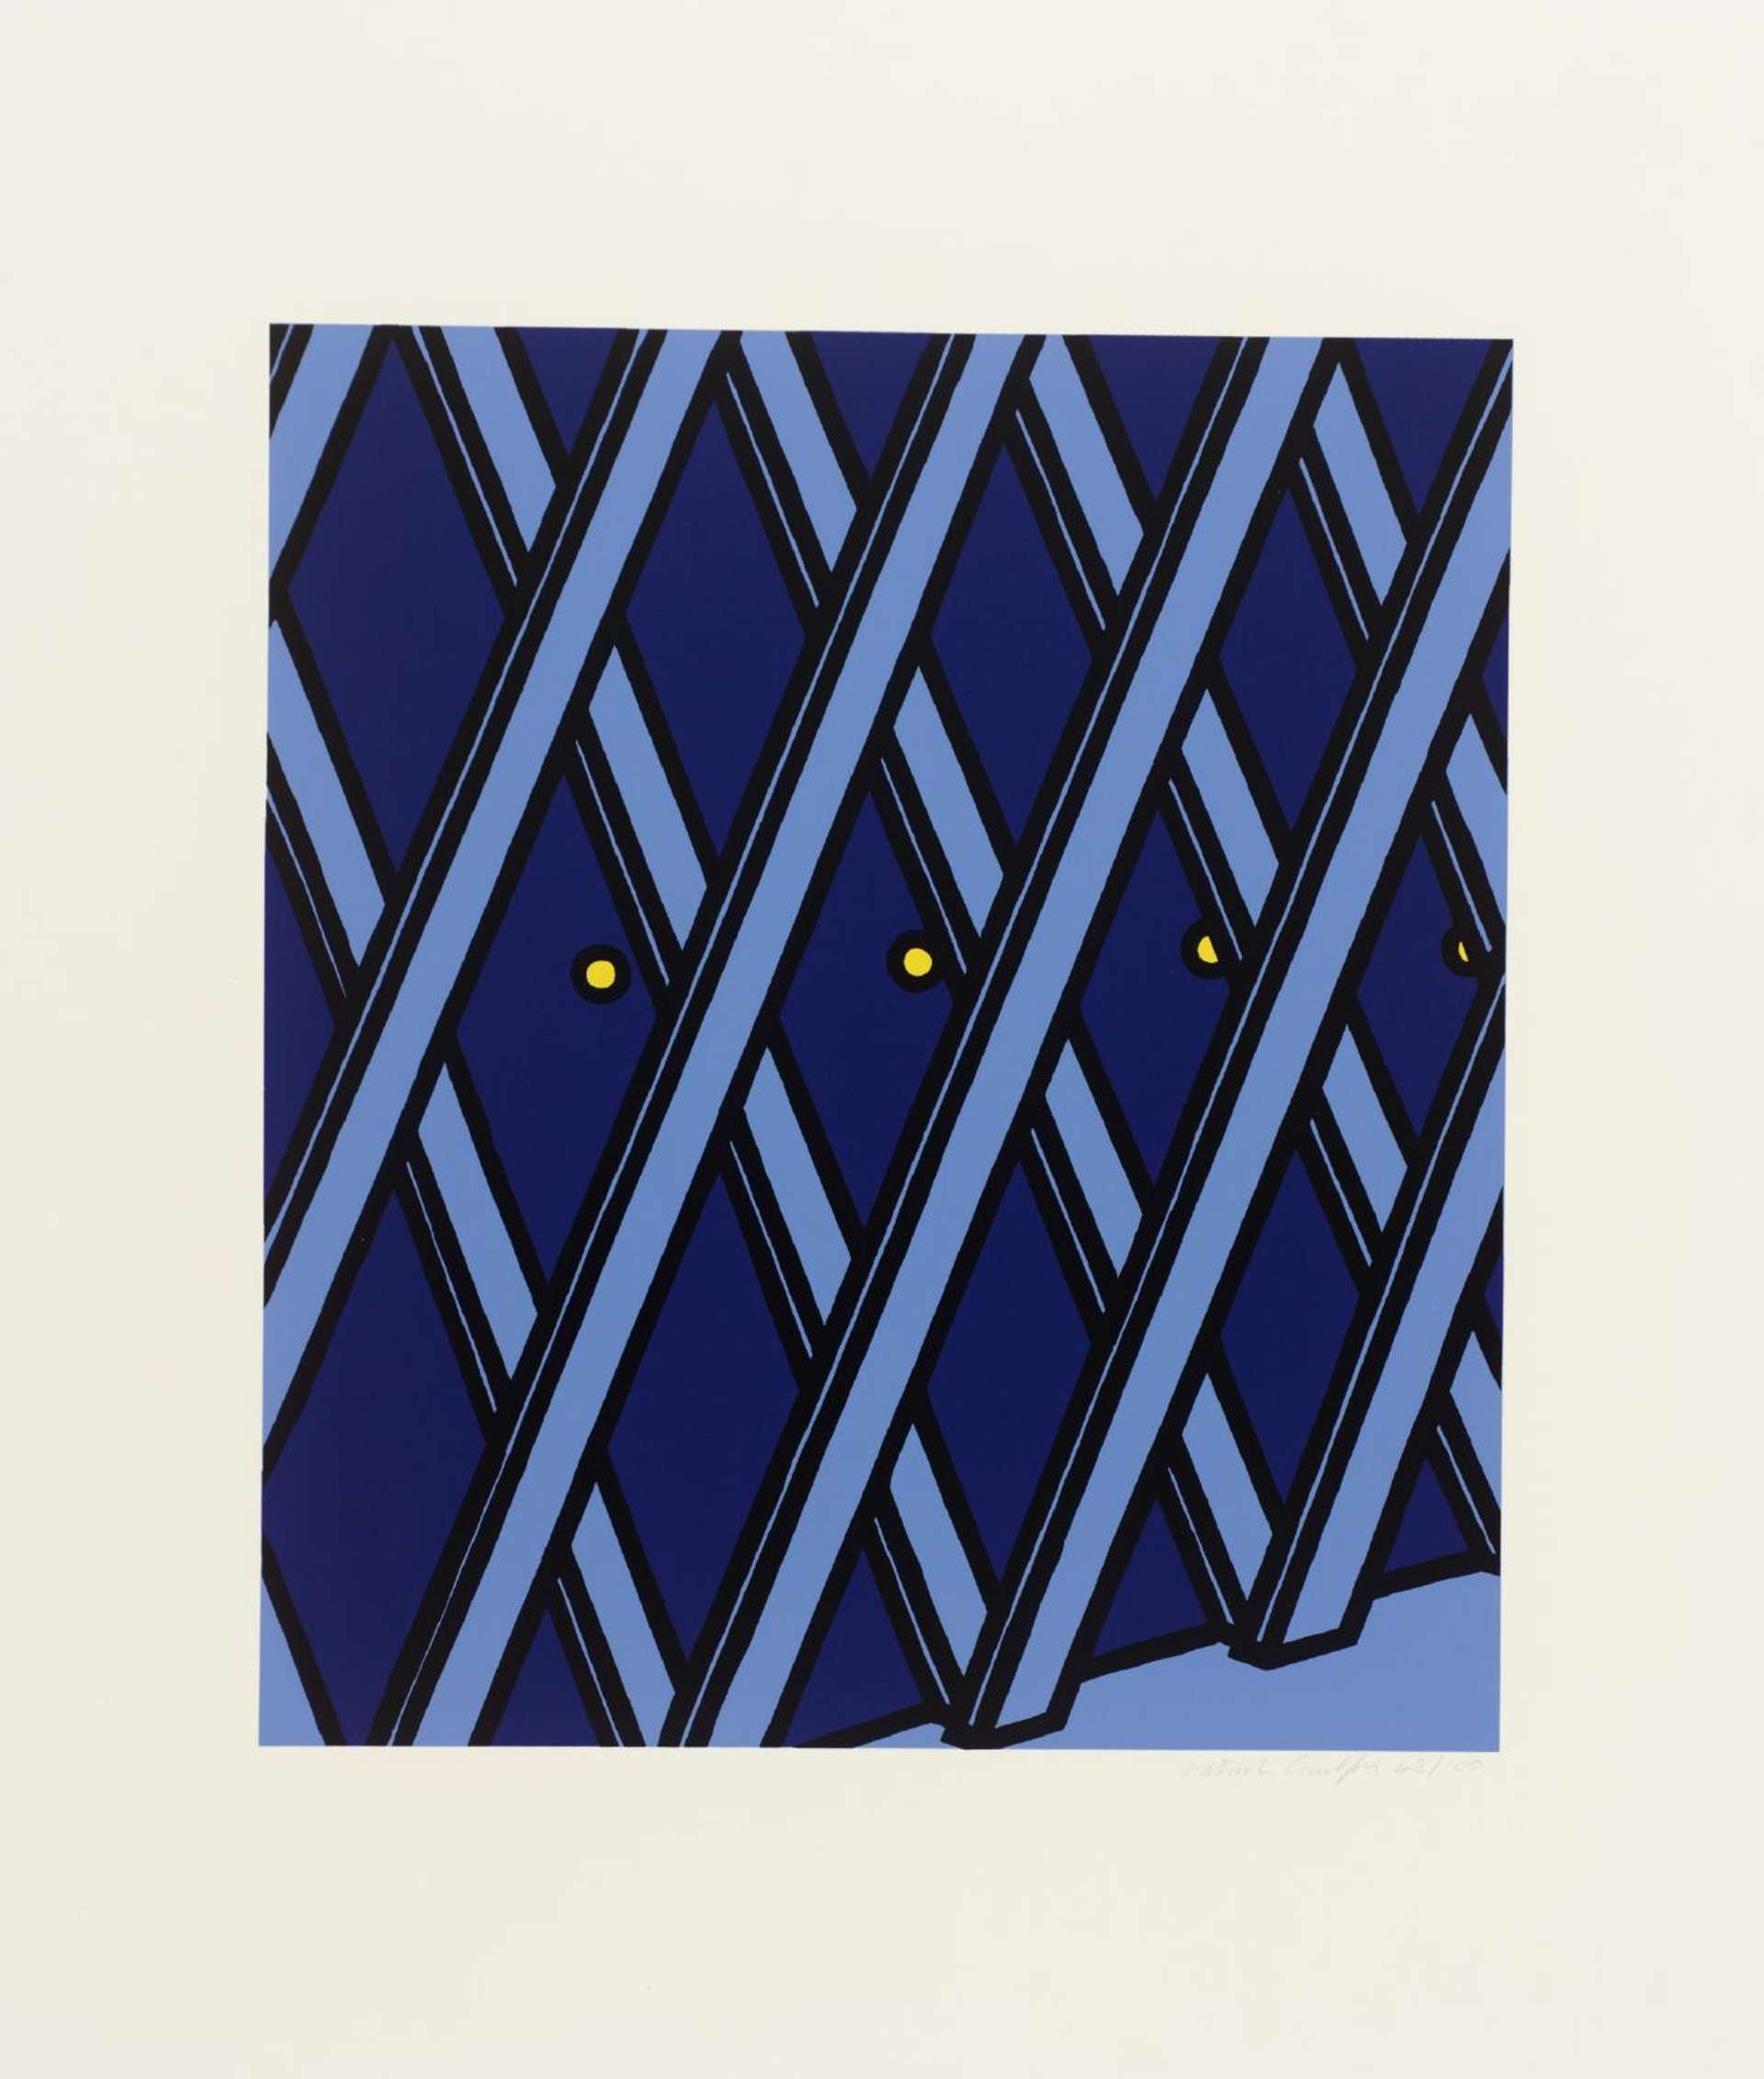 A print by the artist Patrick Caulfield, which depicts a diamond-patterned fence displayed in shades of blue.